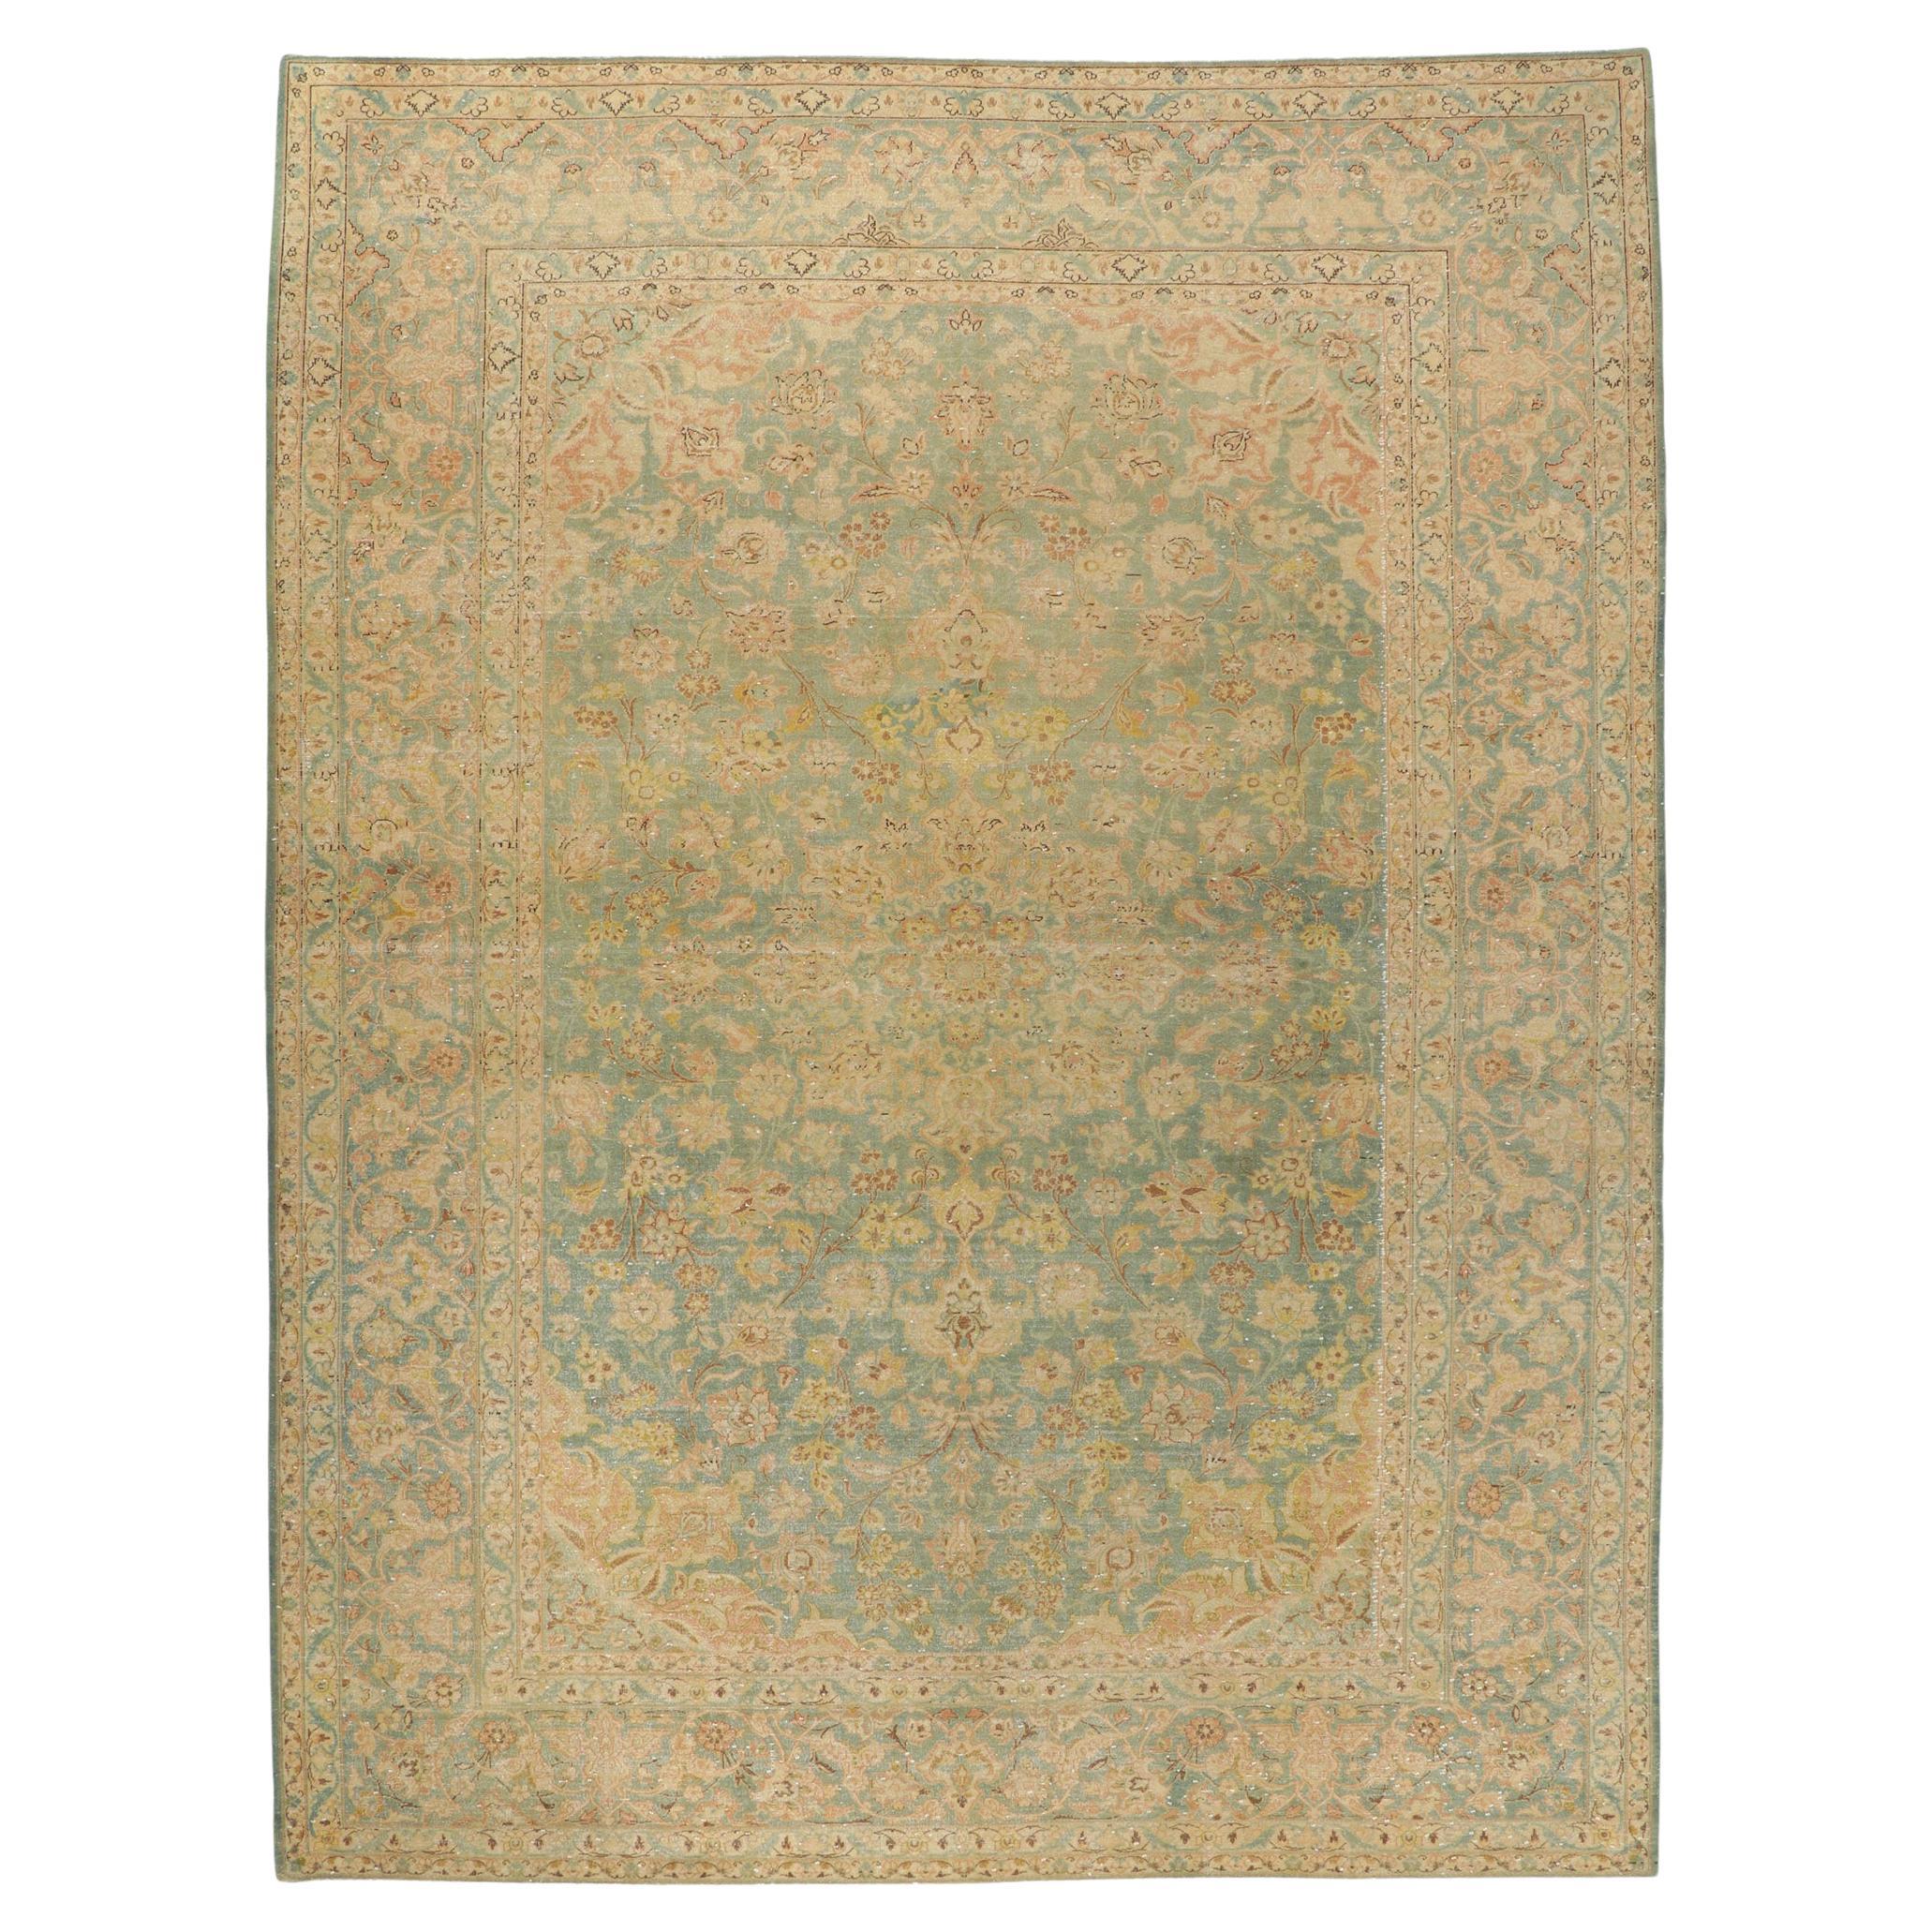 Distressed Vintage Persian Kashan Rug with Faded Soft Earth-Tone Colors